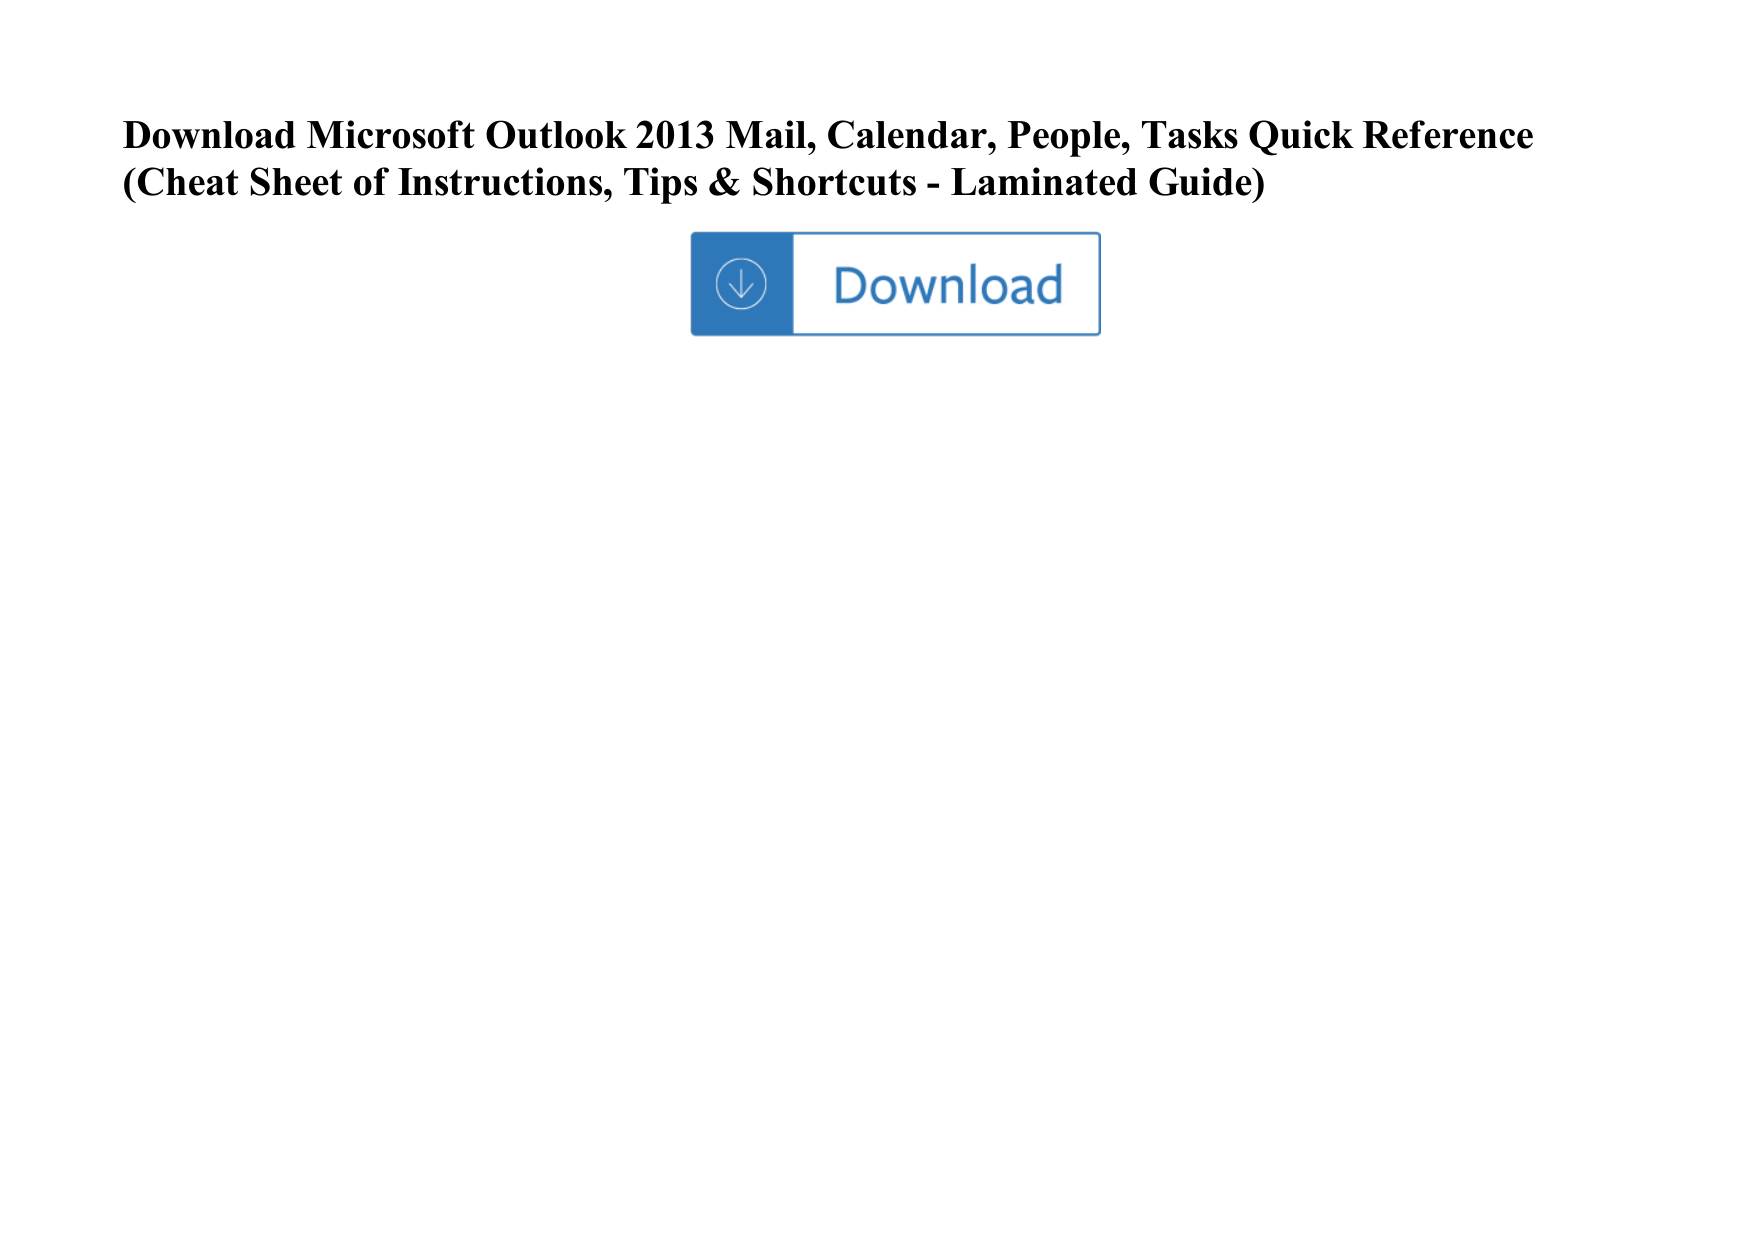 Microsoft Outlook 2013 Mail, Calendar, People, Tasks Quick Reference